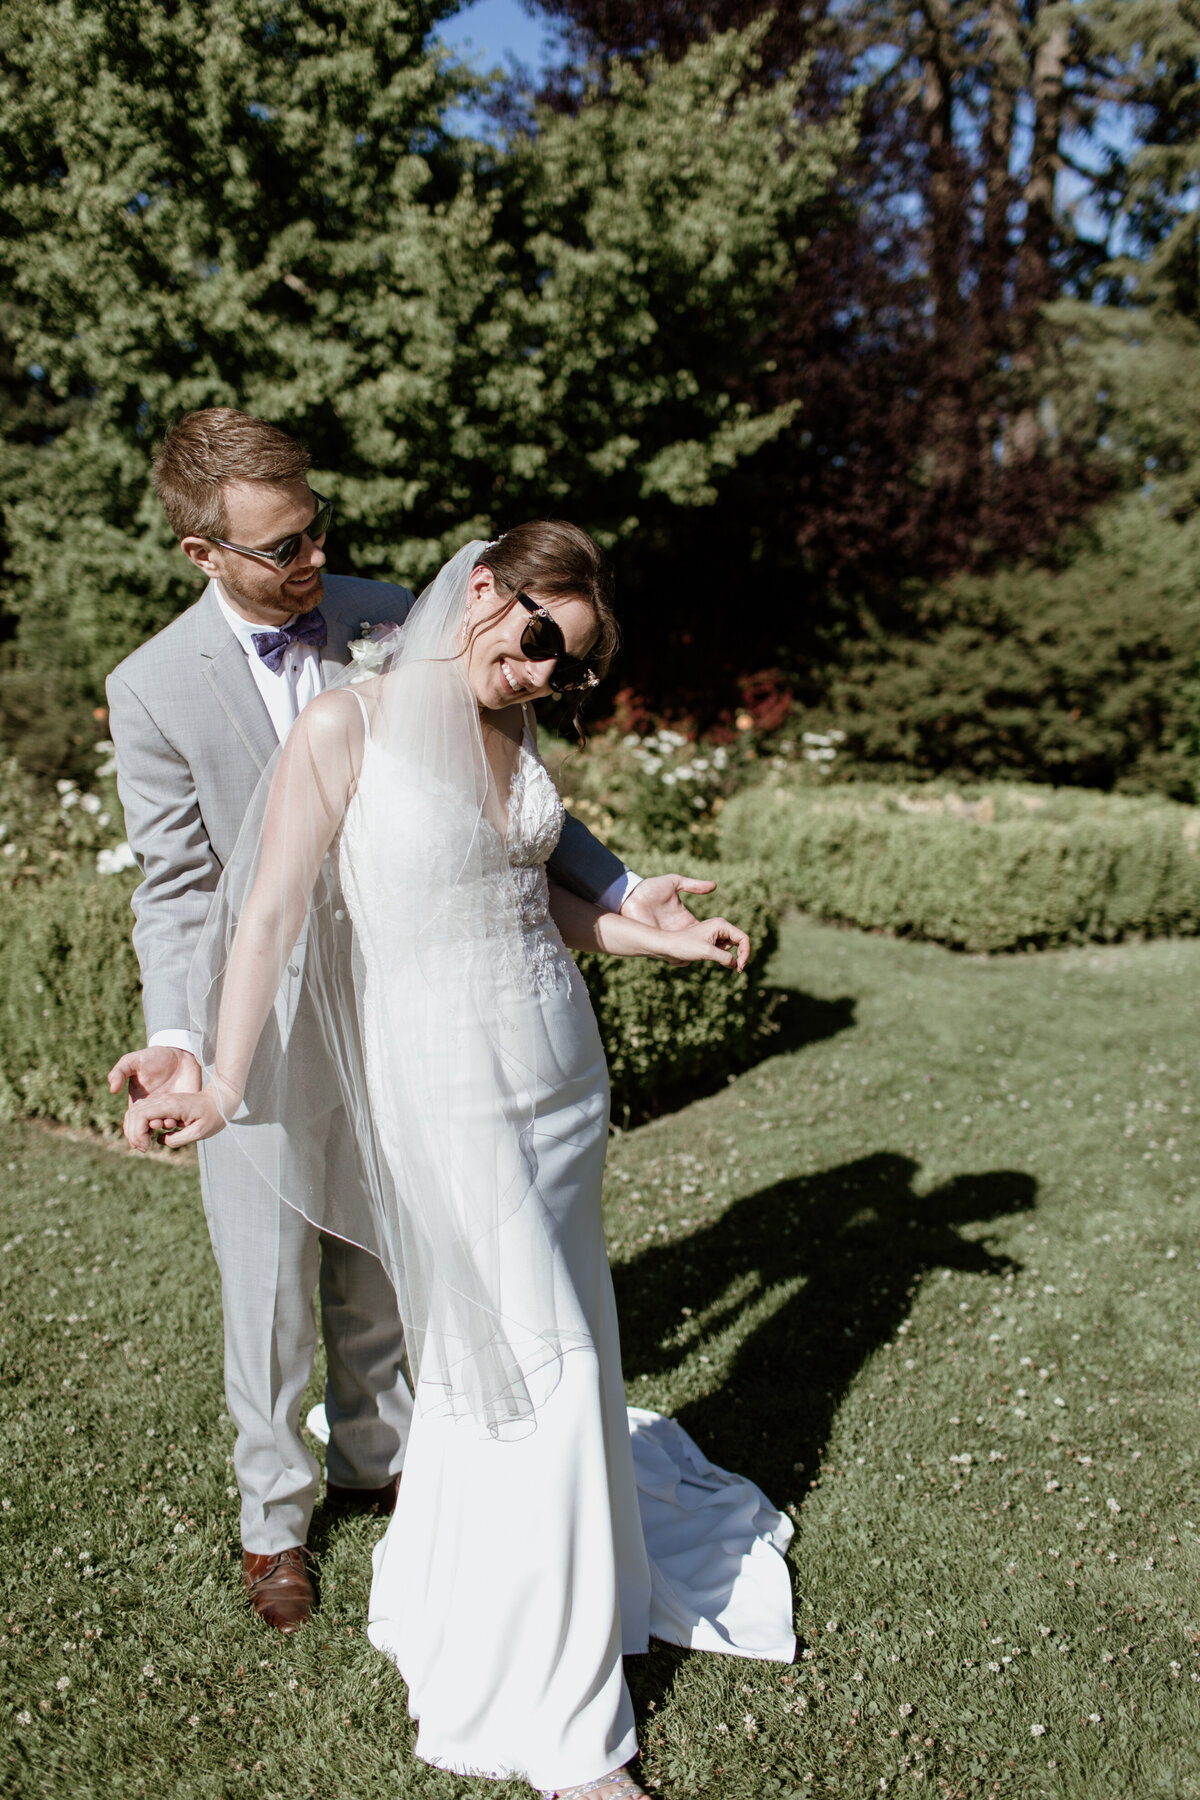 A fun candid moment between a bride and groom at the Woodland Park Zoo Rose Garden in Seattle. Captured by Fort Worth Wedding Photographer, Megan Christine Studio